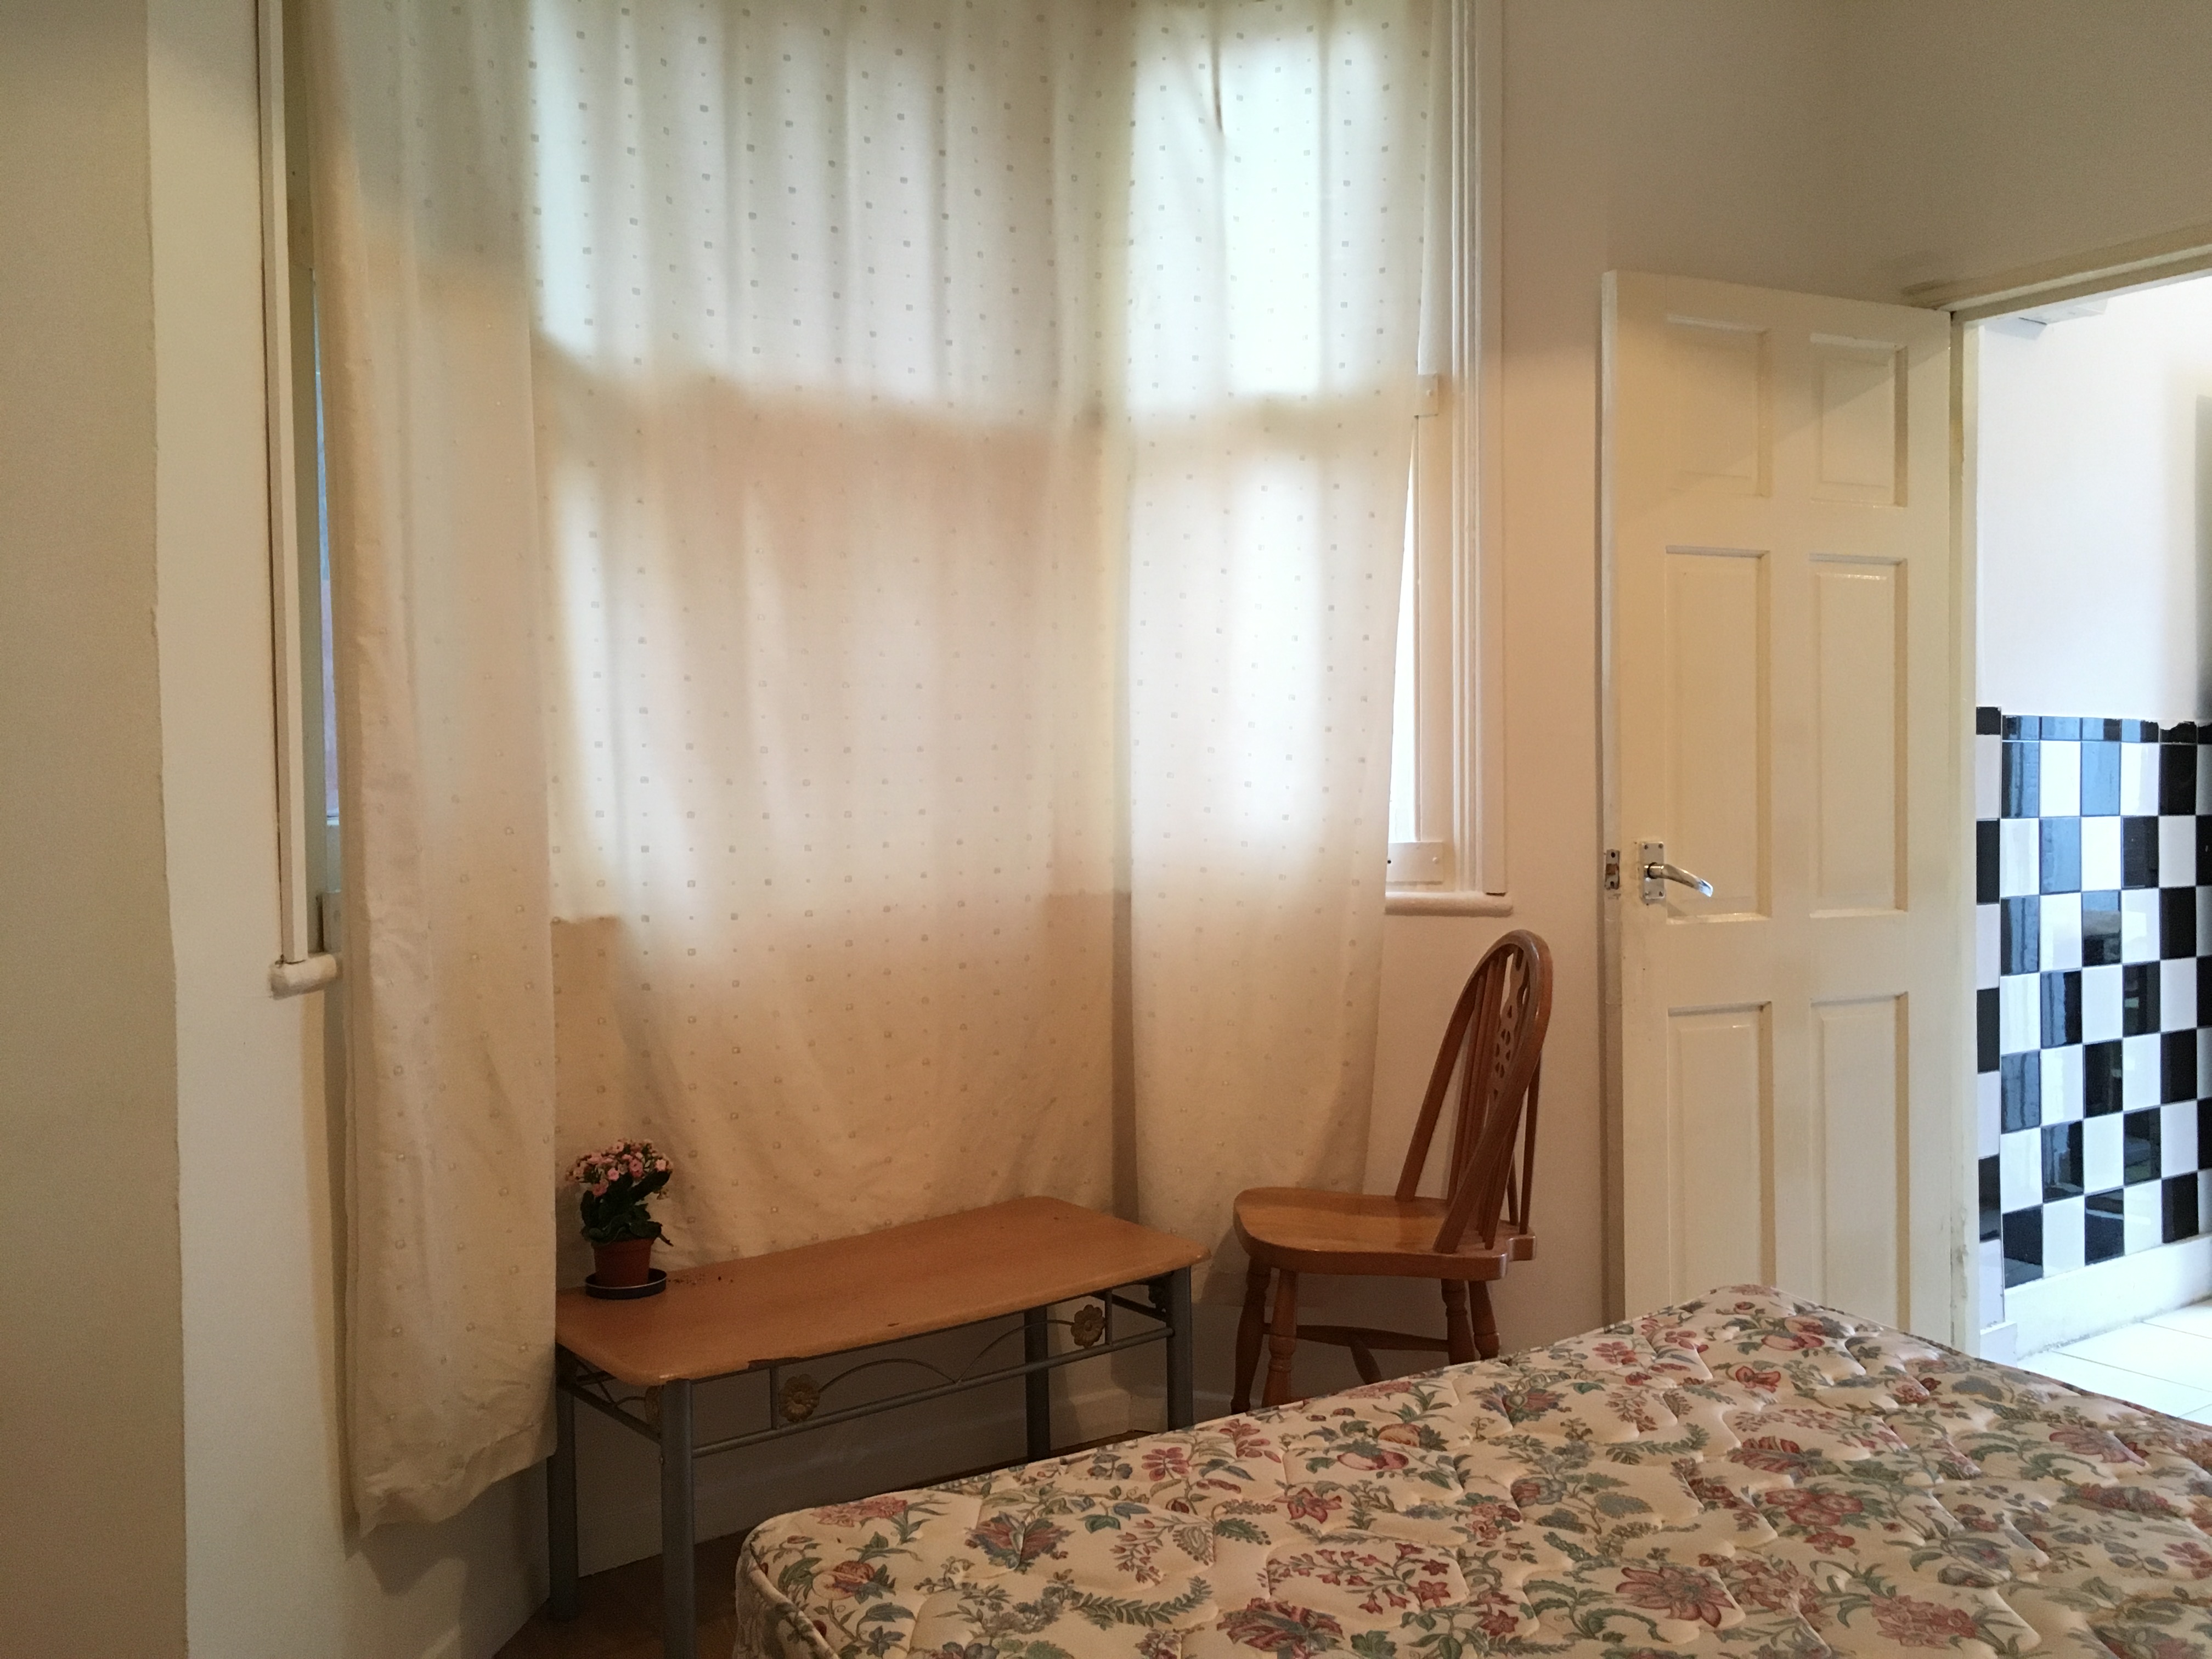 Spacious studio flat with a separate kitchen situated in Chingford Road, London E17.